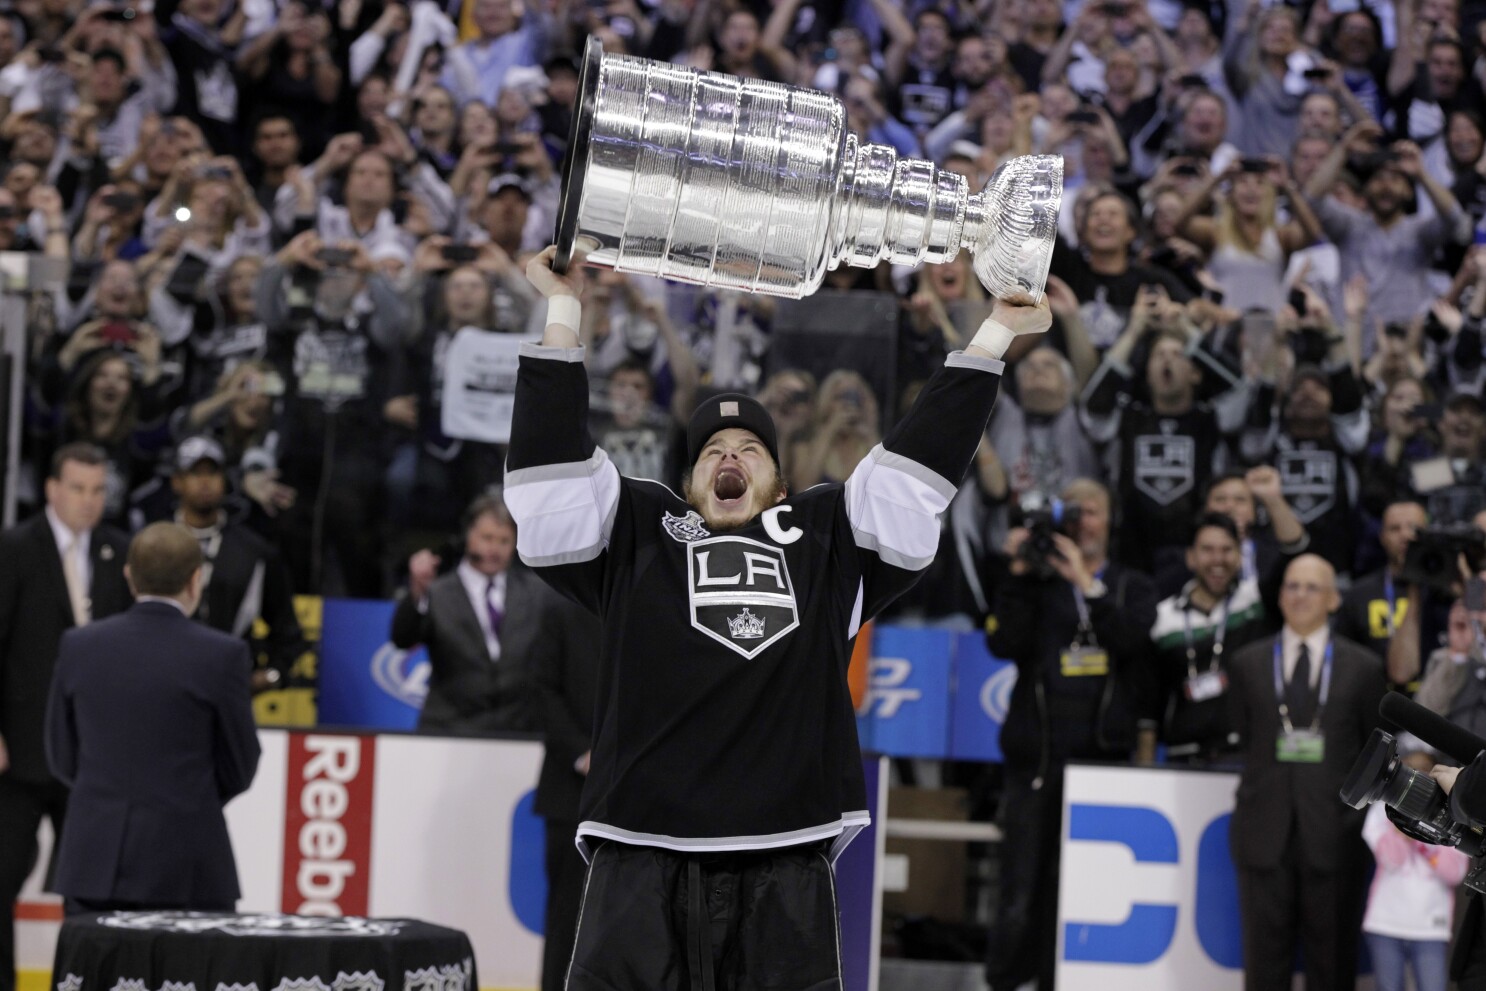 Kings forward Dustin Brown to retire after Stanley Cup Playoffs